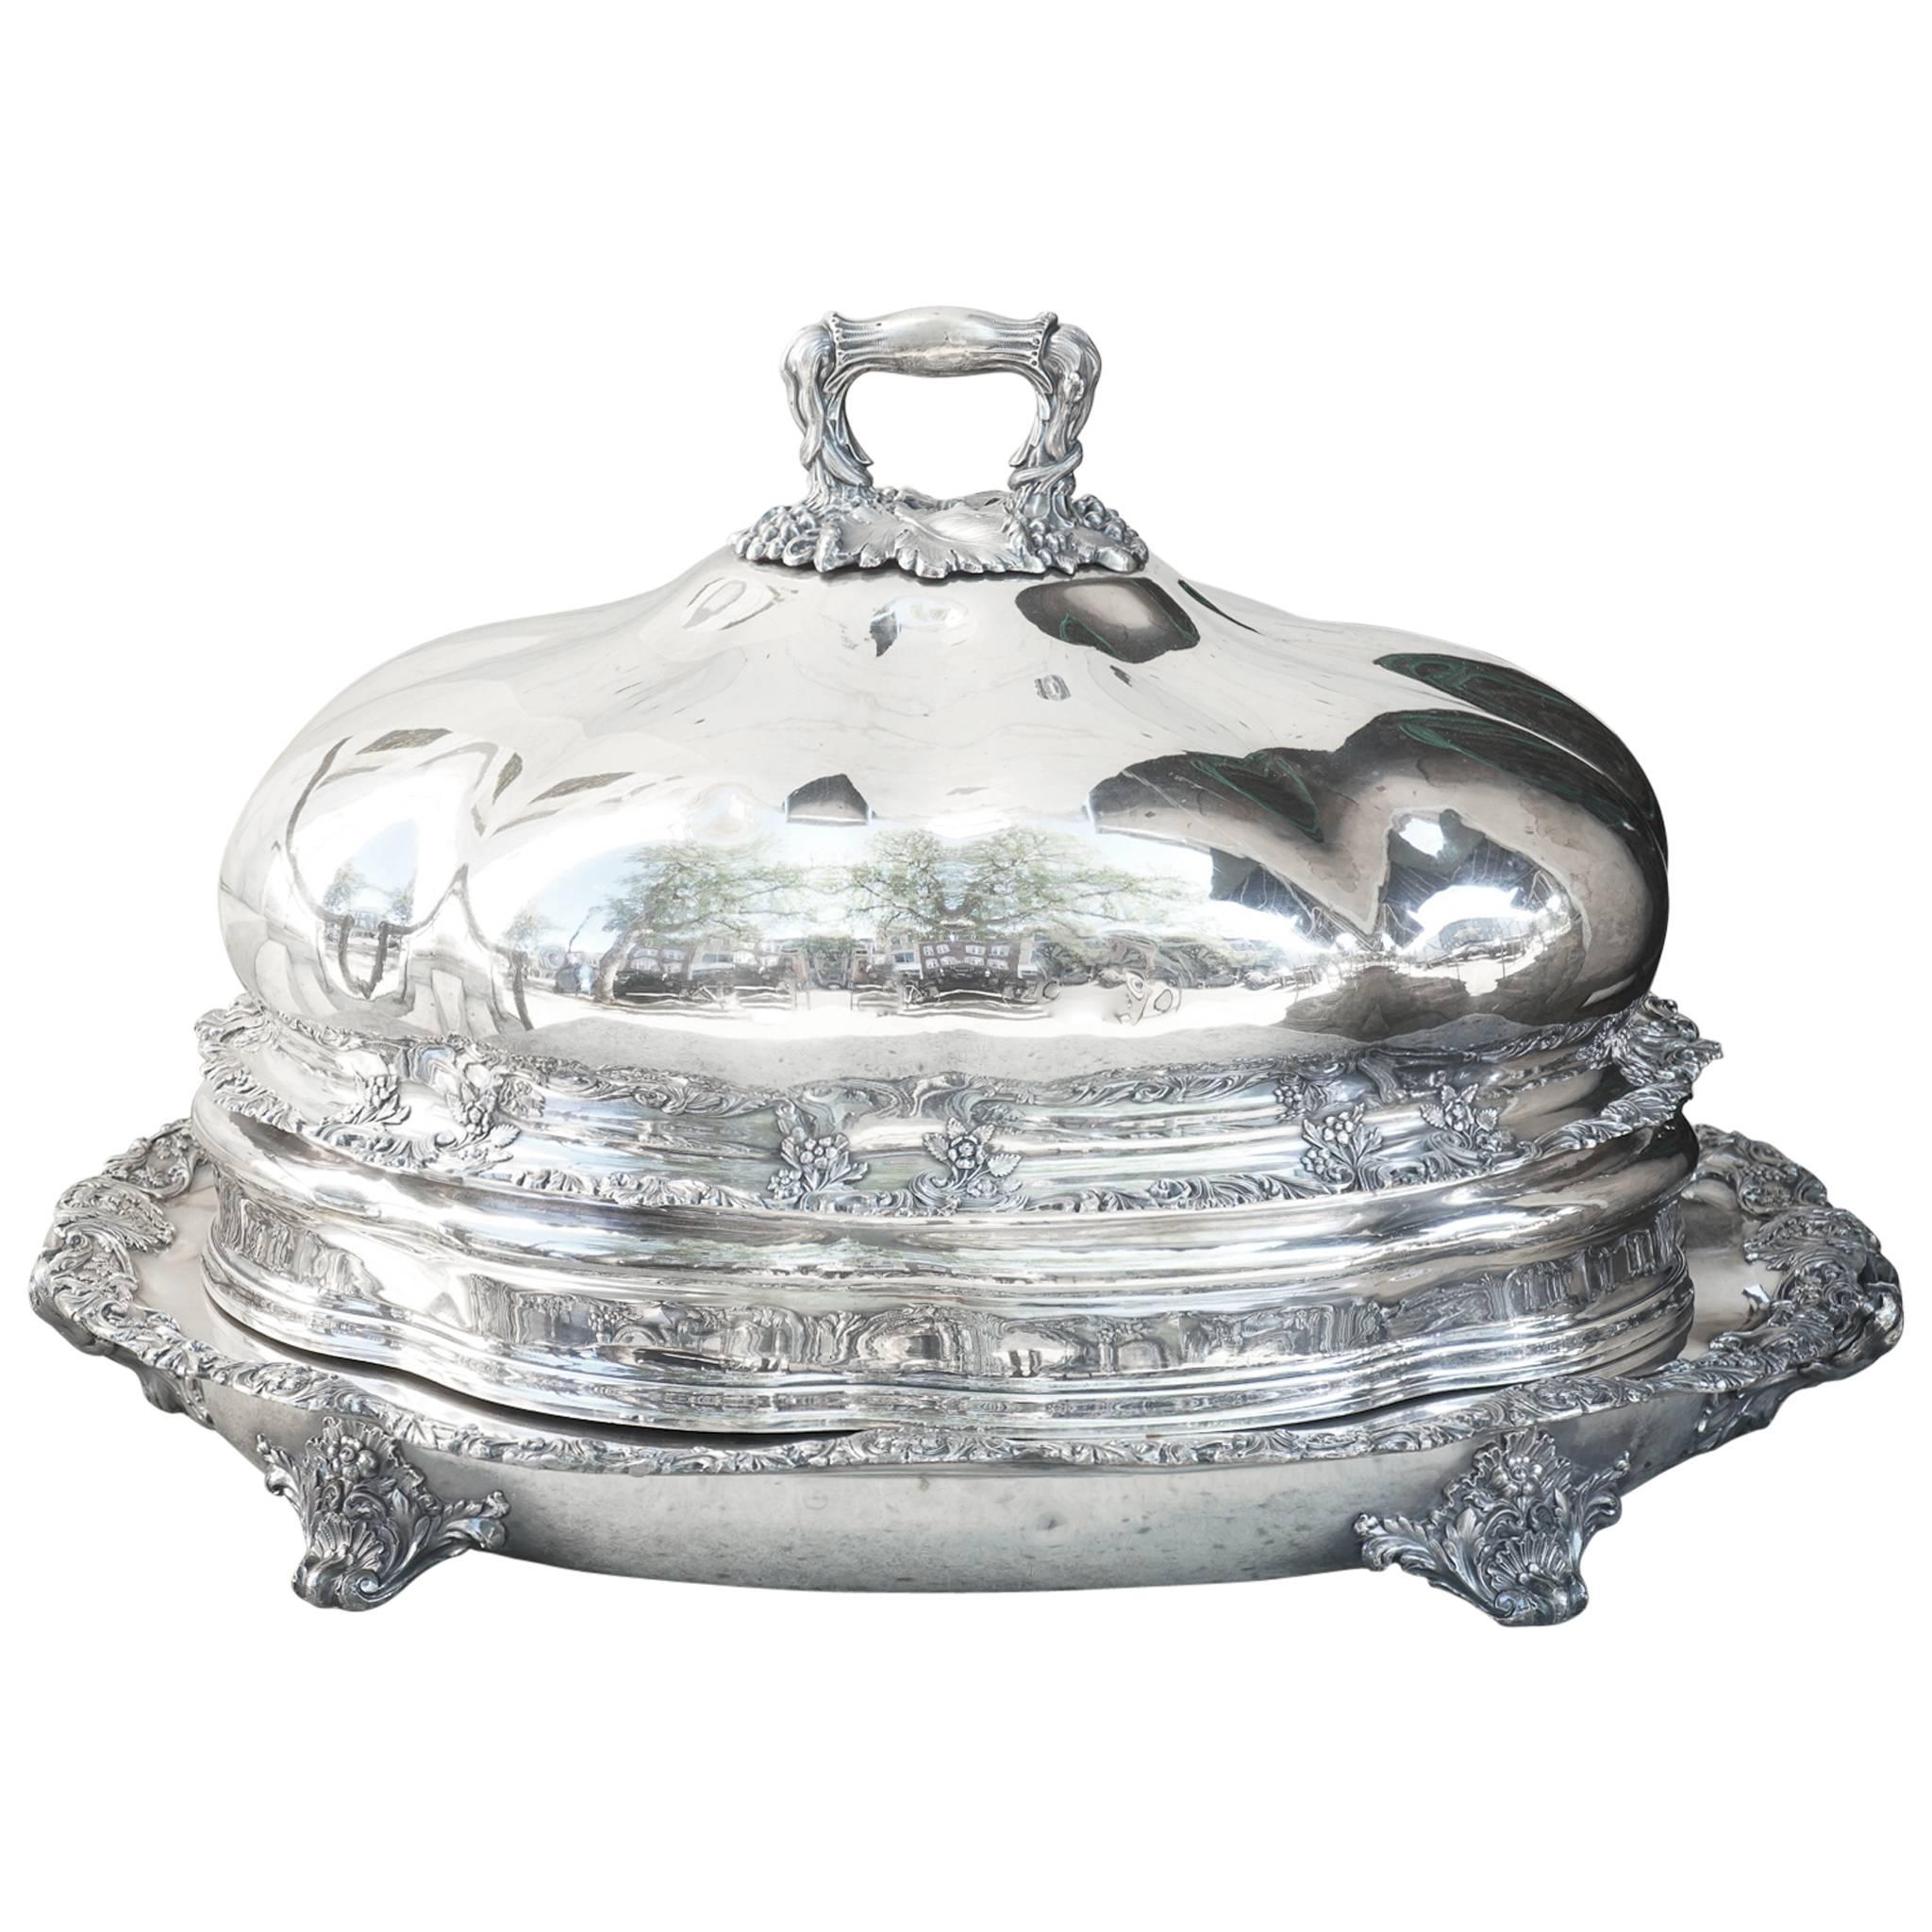 Very Large and Impressive Victorian Silver Plate Covered Meat Platter